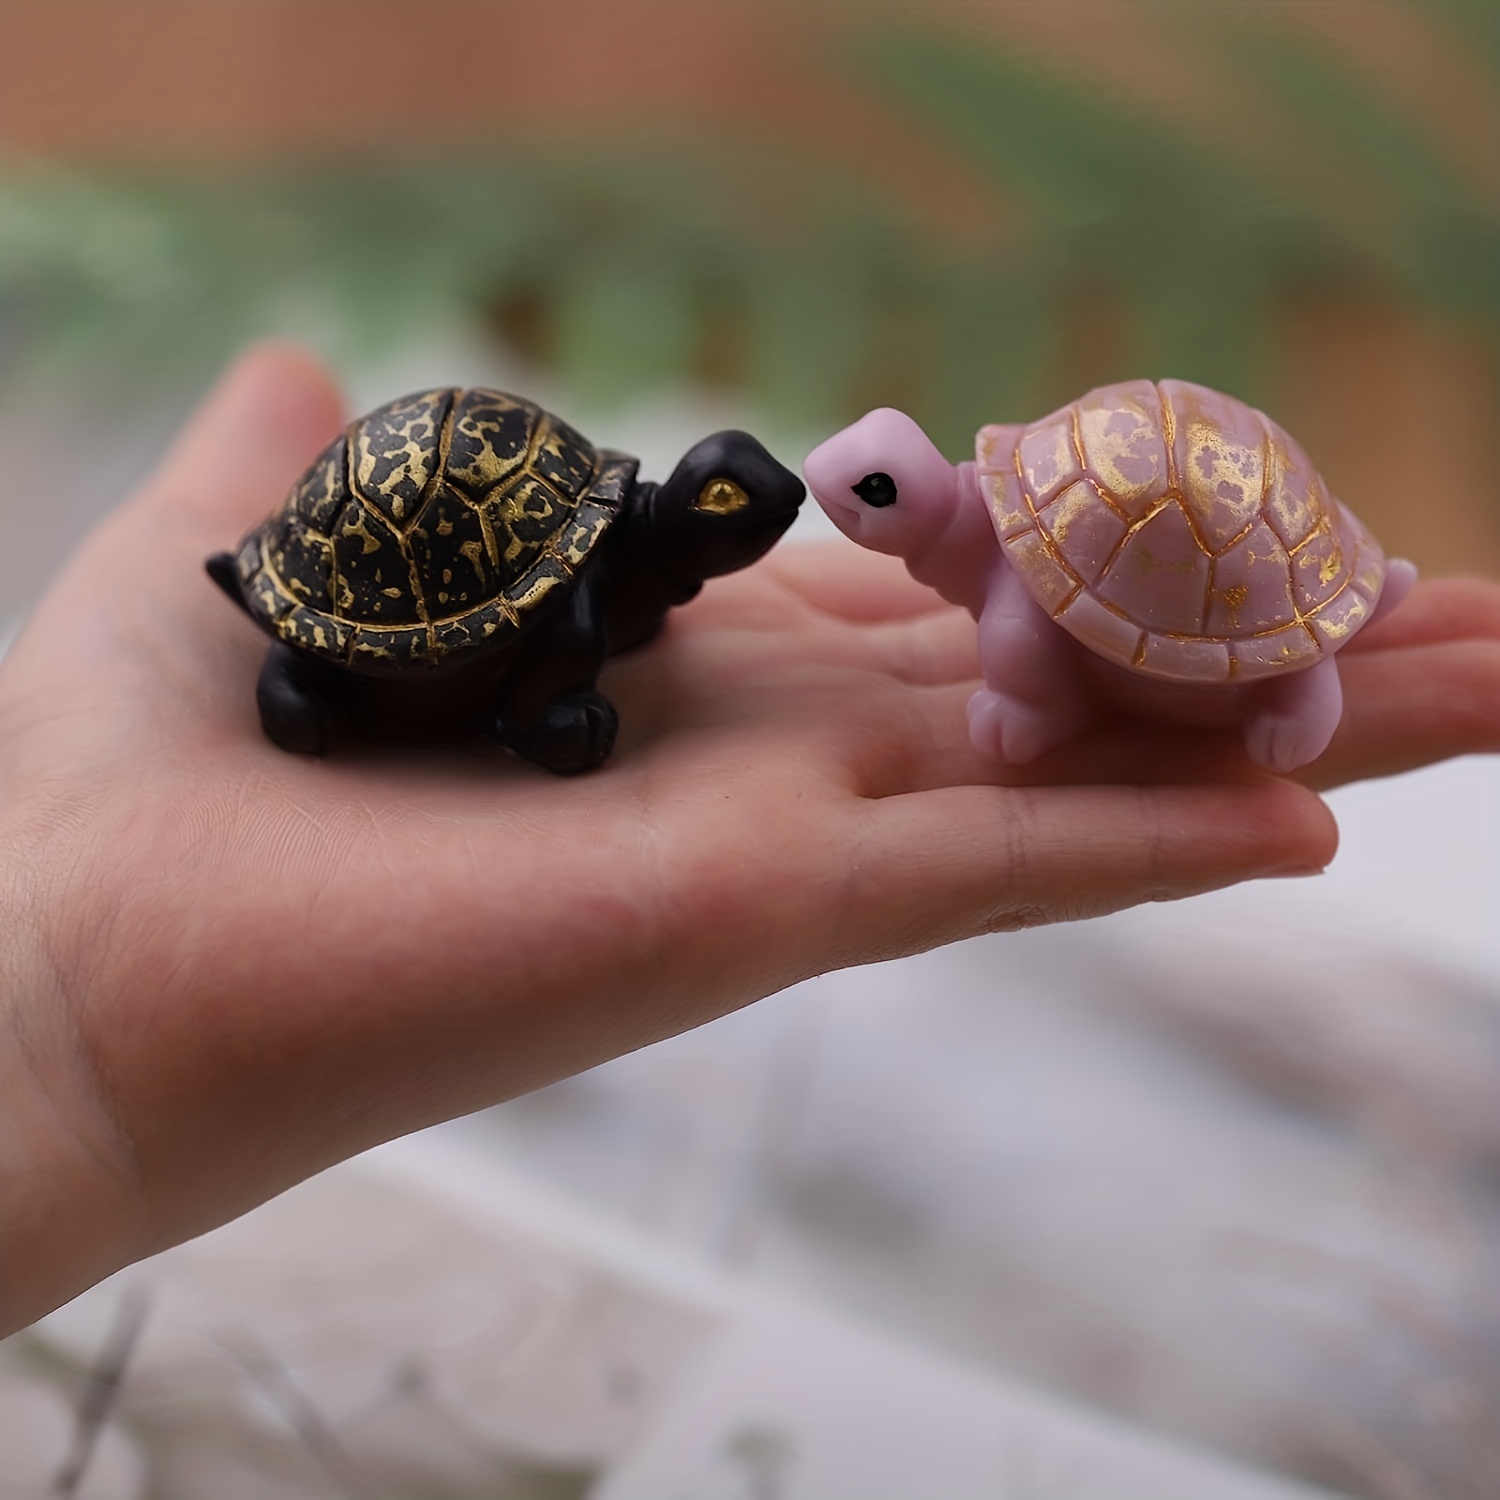 Tiny Turtles-set of 3 Turtles-polymer Clay Turtles-made to Order